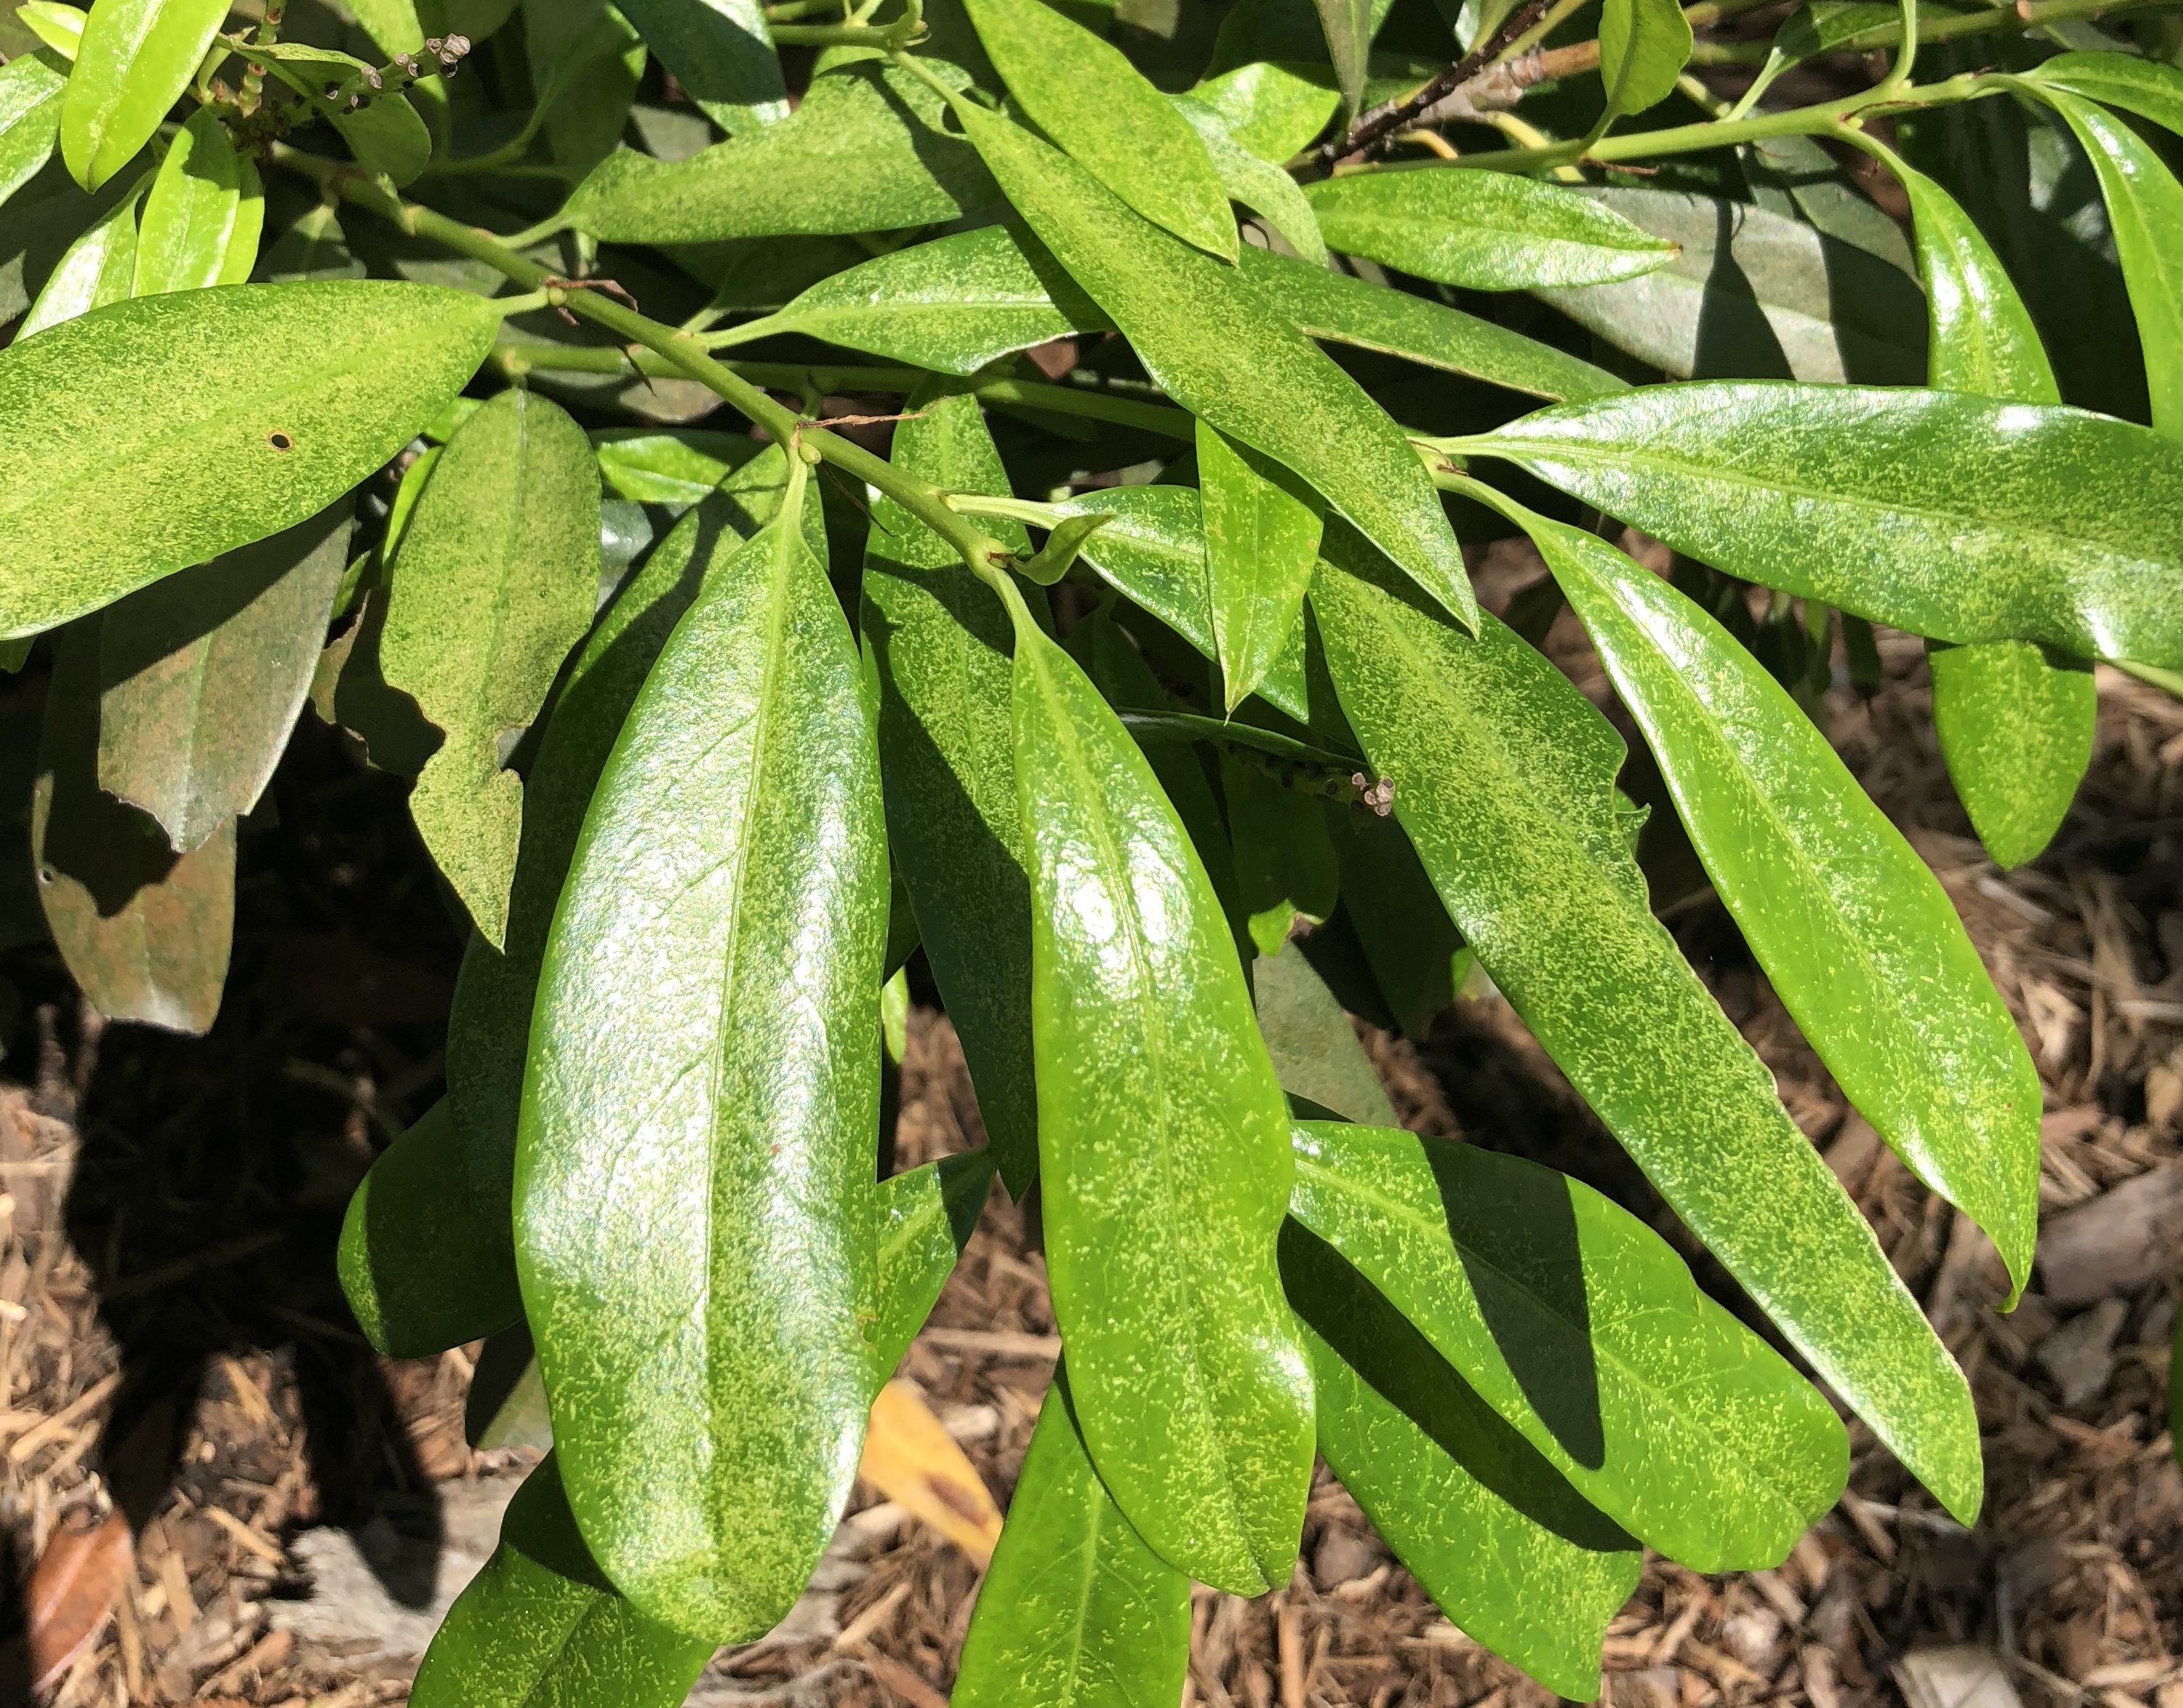 Southern red mite stippling damage on cherry laurel